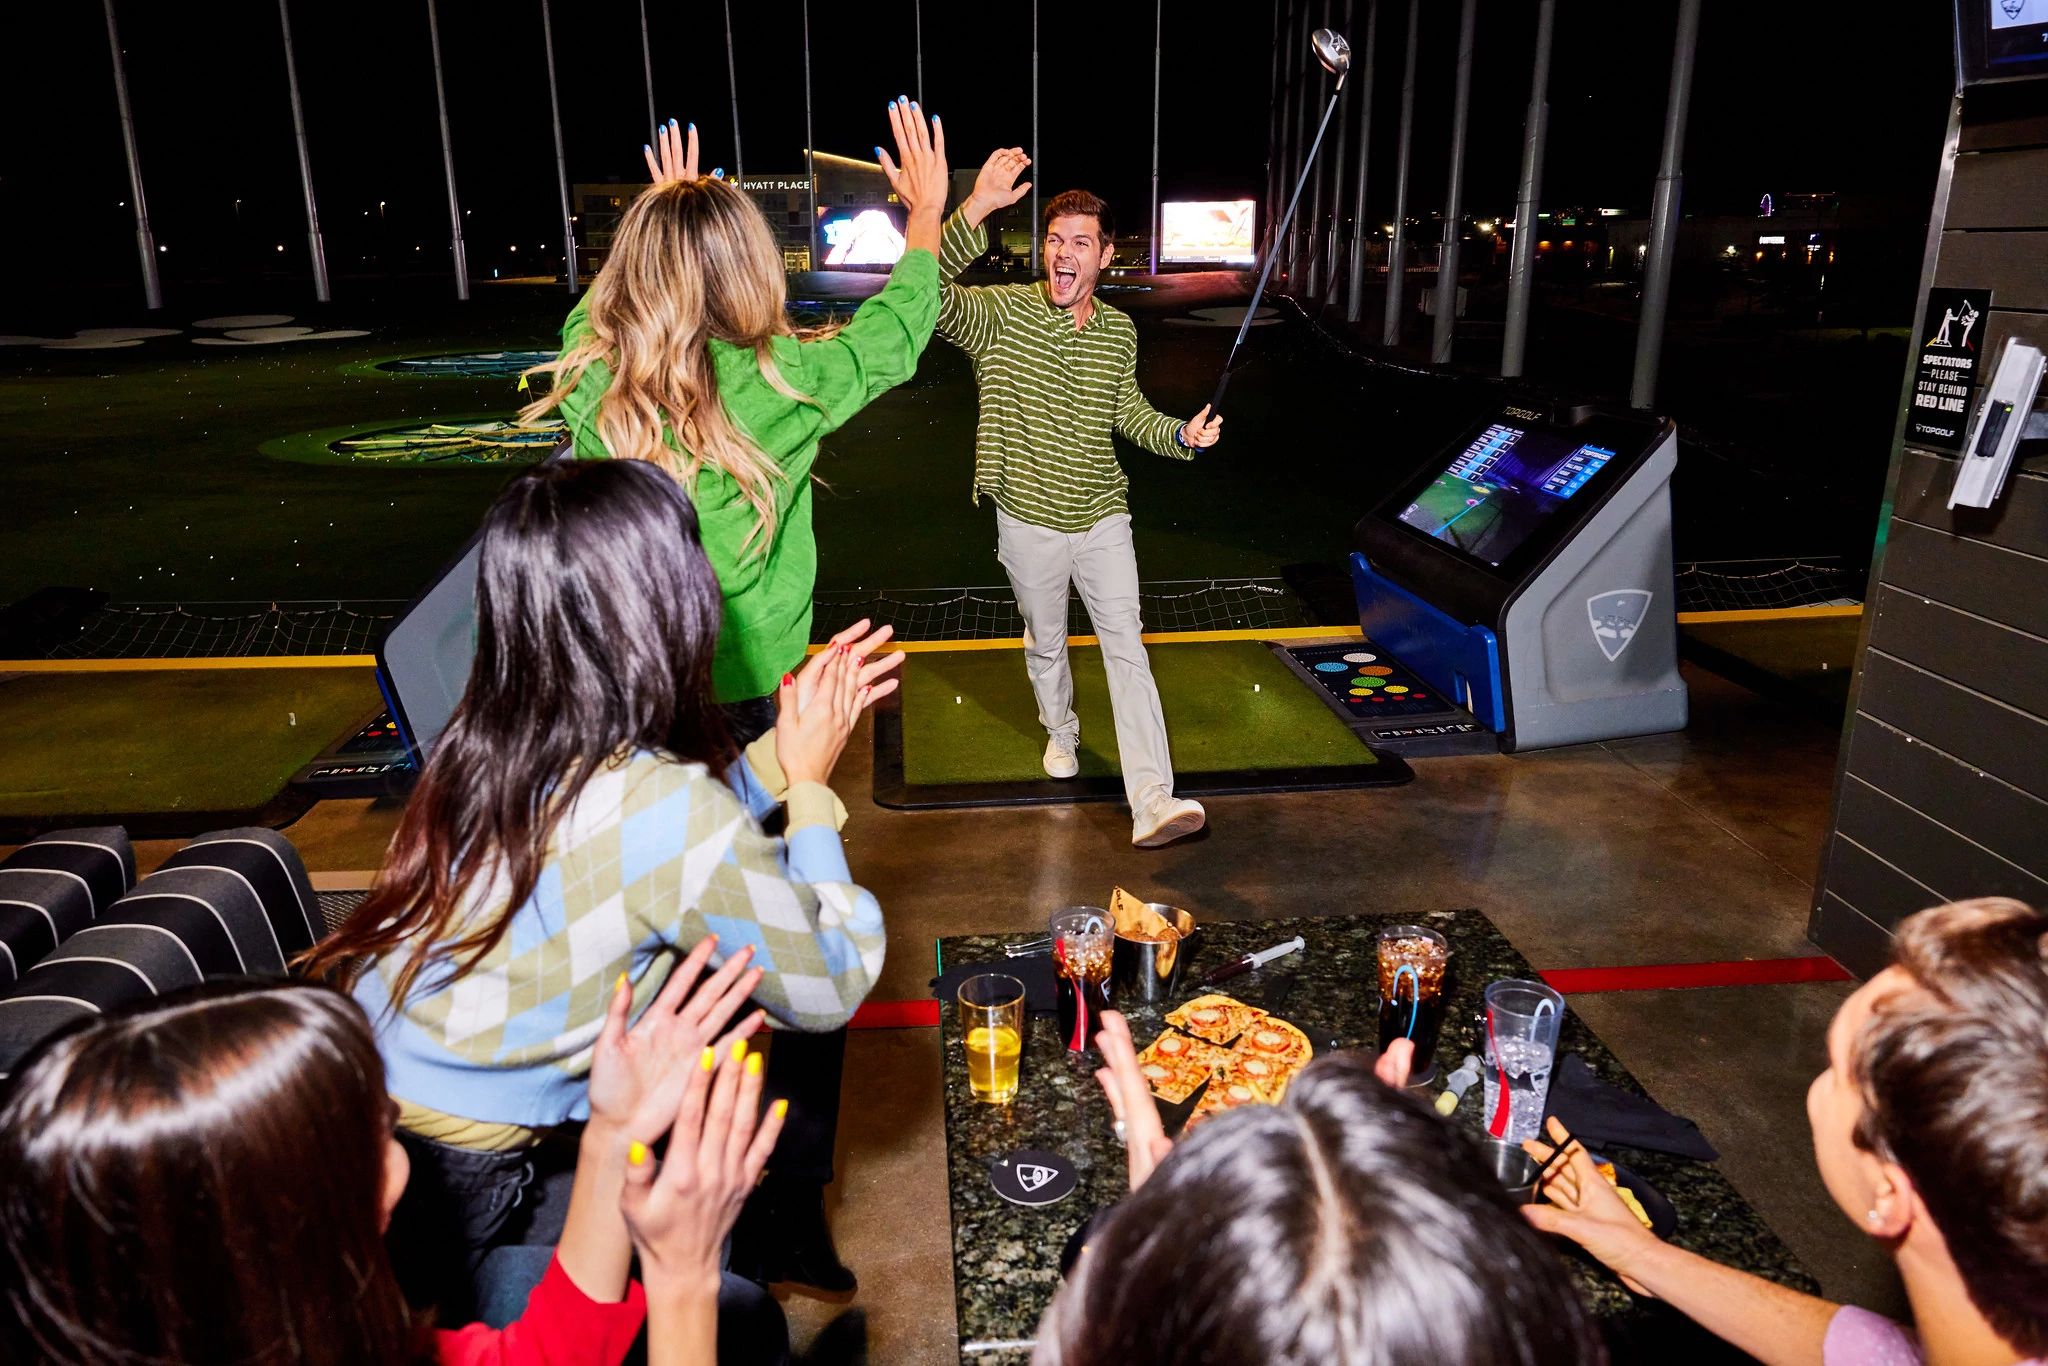 Eating Orlando An Orlando Food Blog: Topgolf Orlando opens this Friday:  Let's check out the food!